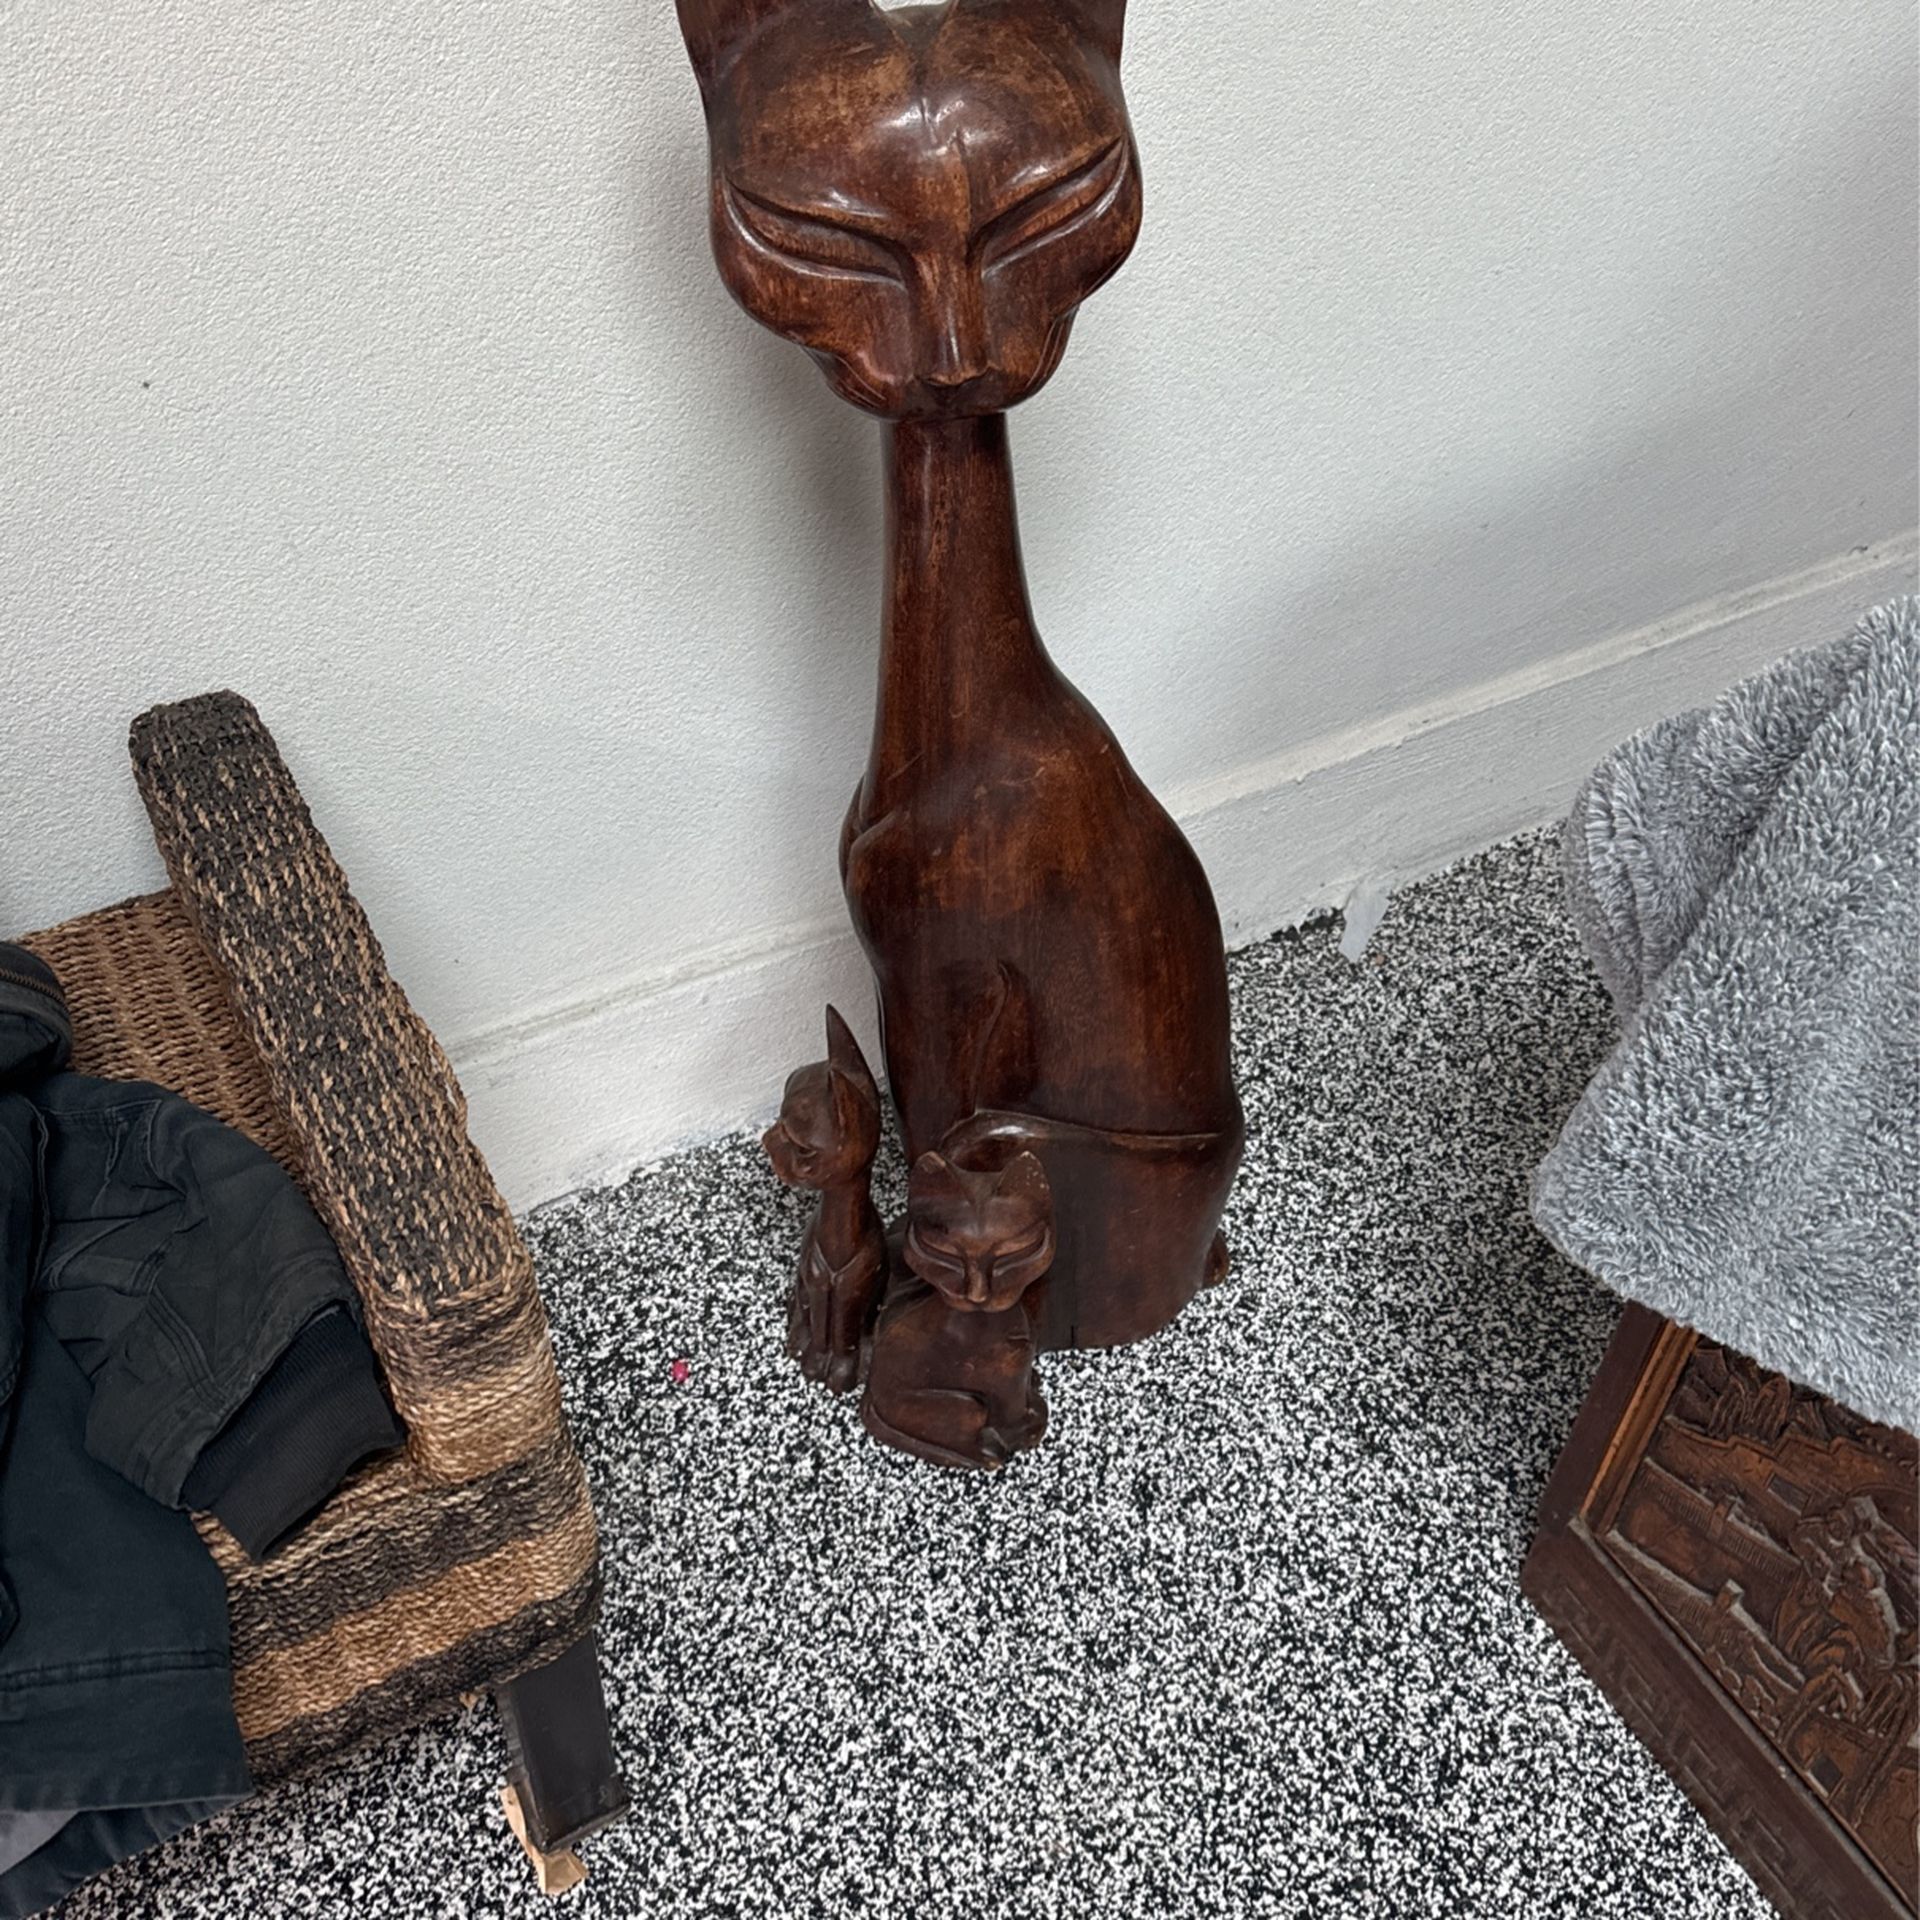 3 Foot Tall Cat With Two Babies Solid Wood Antique Or Vintage